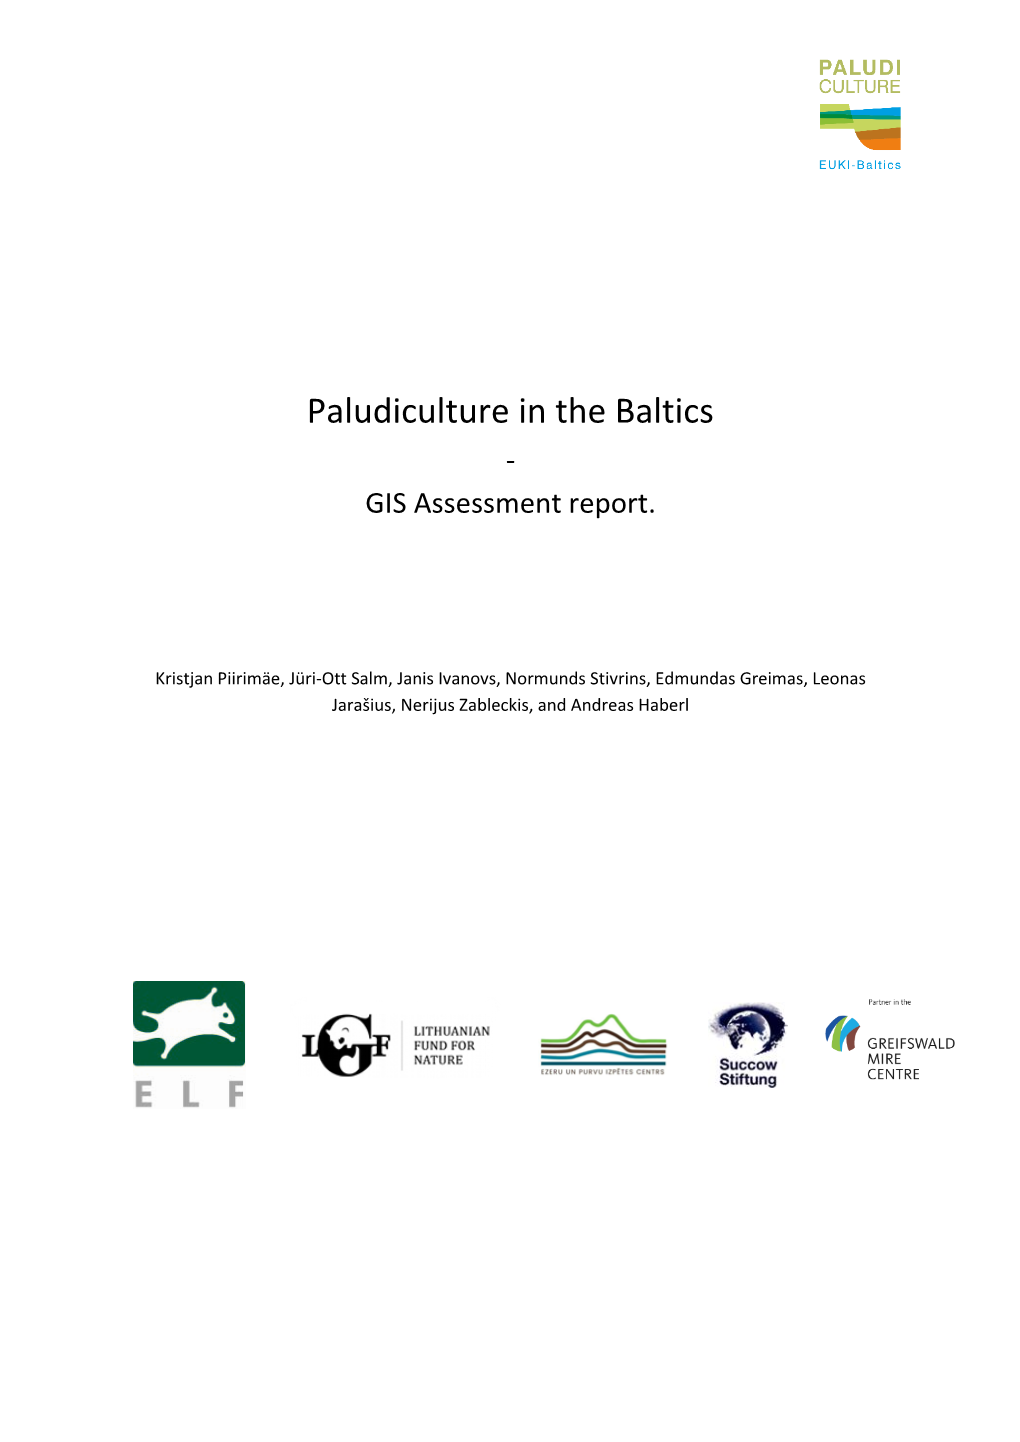 Paludiculture in the Baltics - GIS Assessment Report